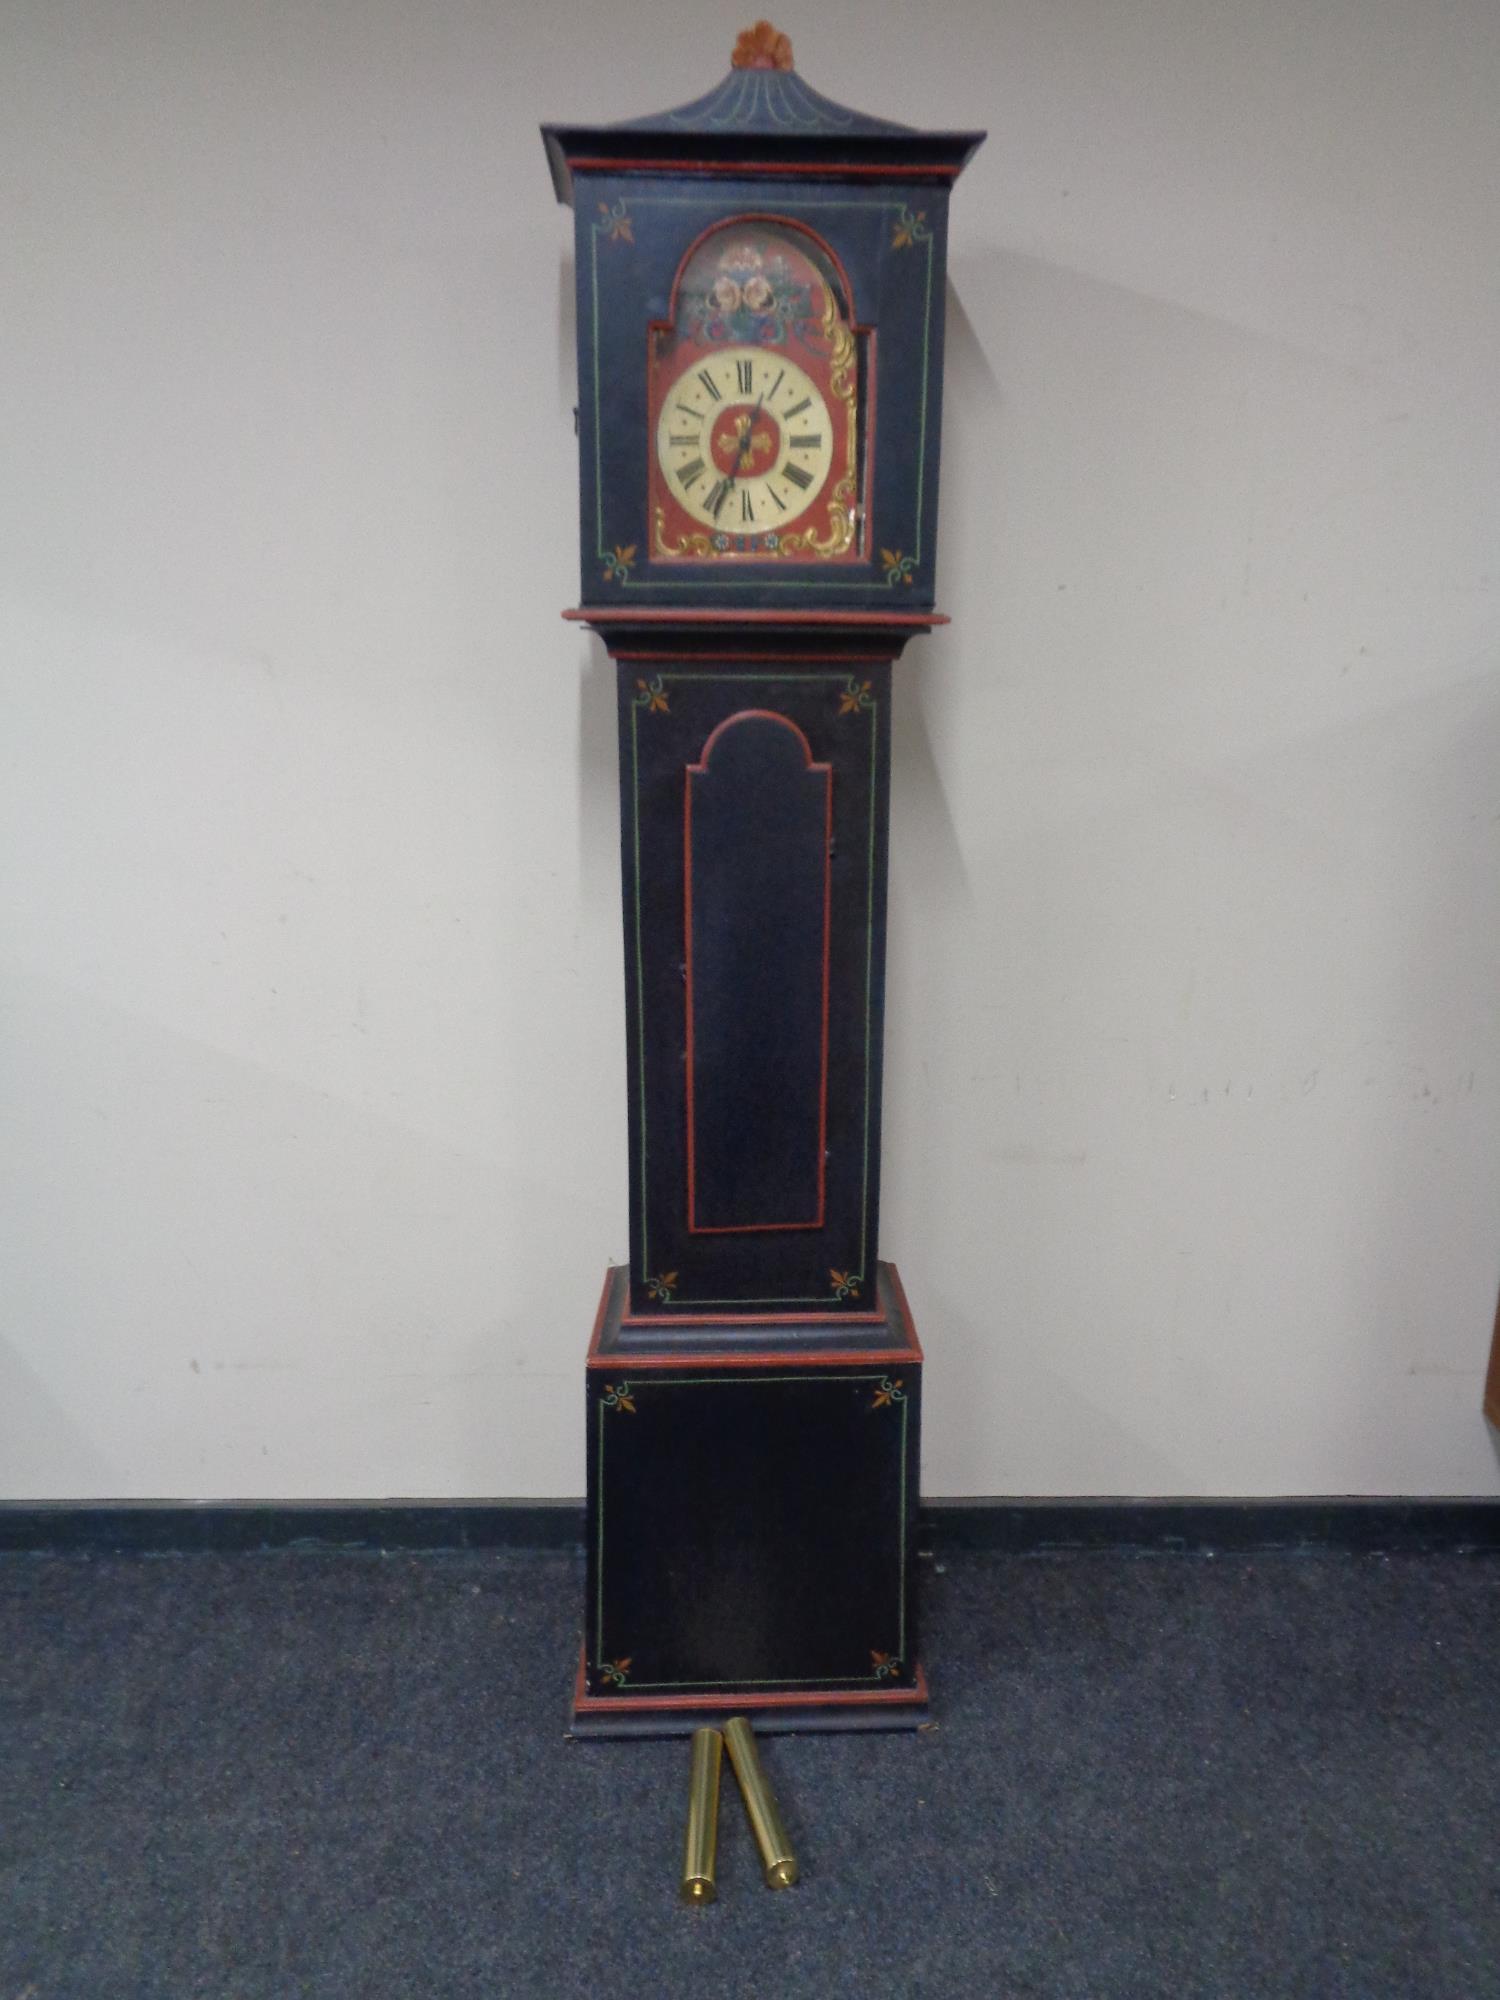 An early 20th century painted continental longcase clock with painted dial, pendulum and weights.